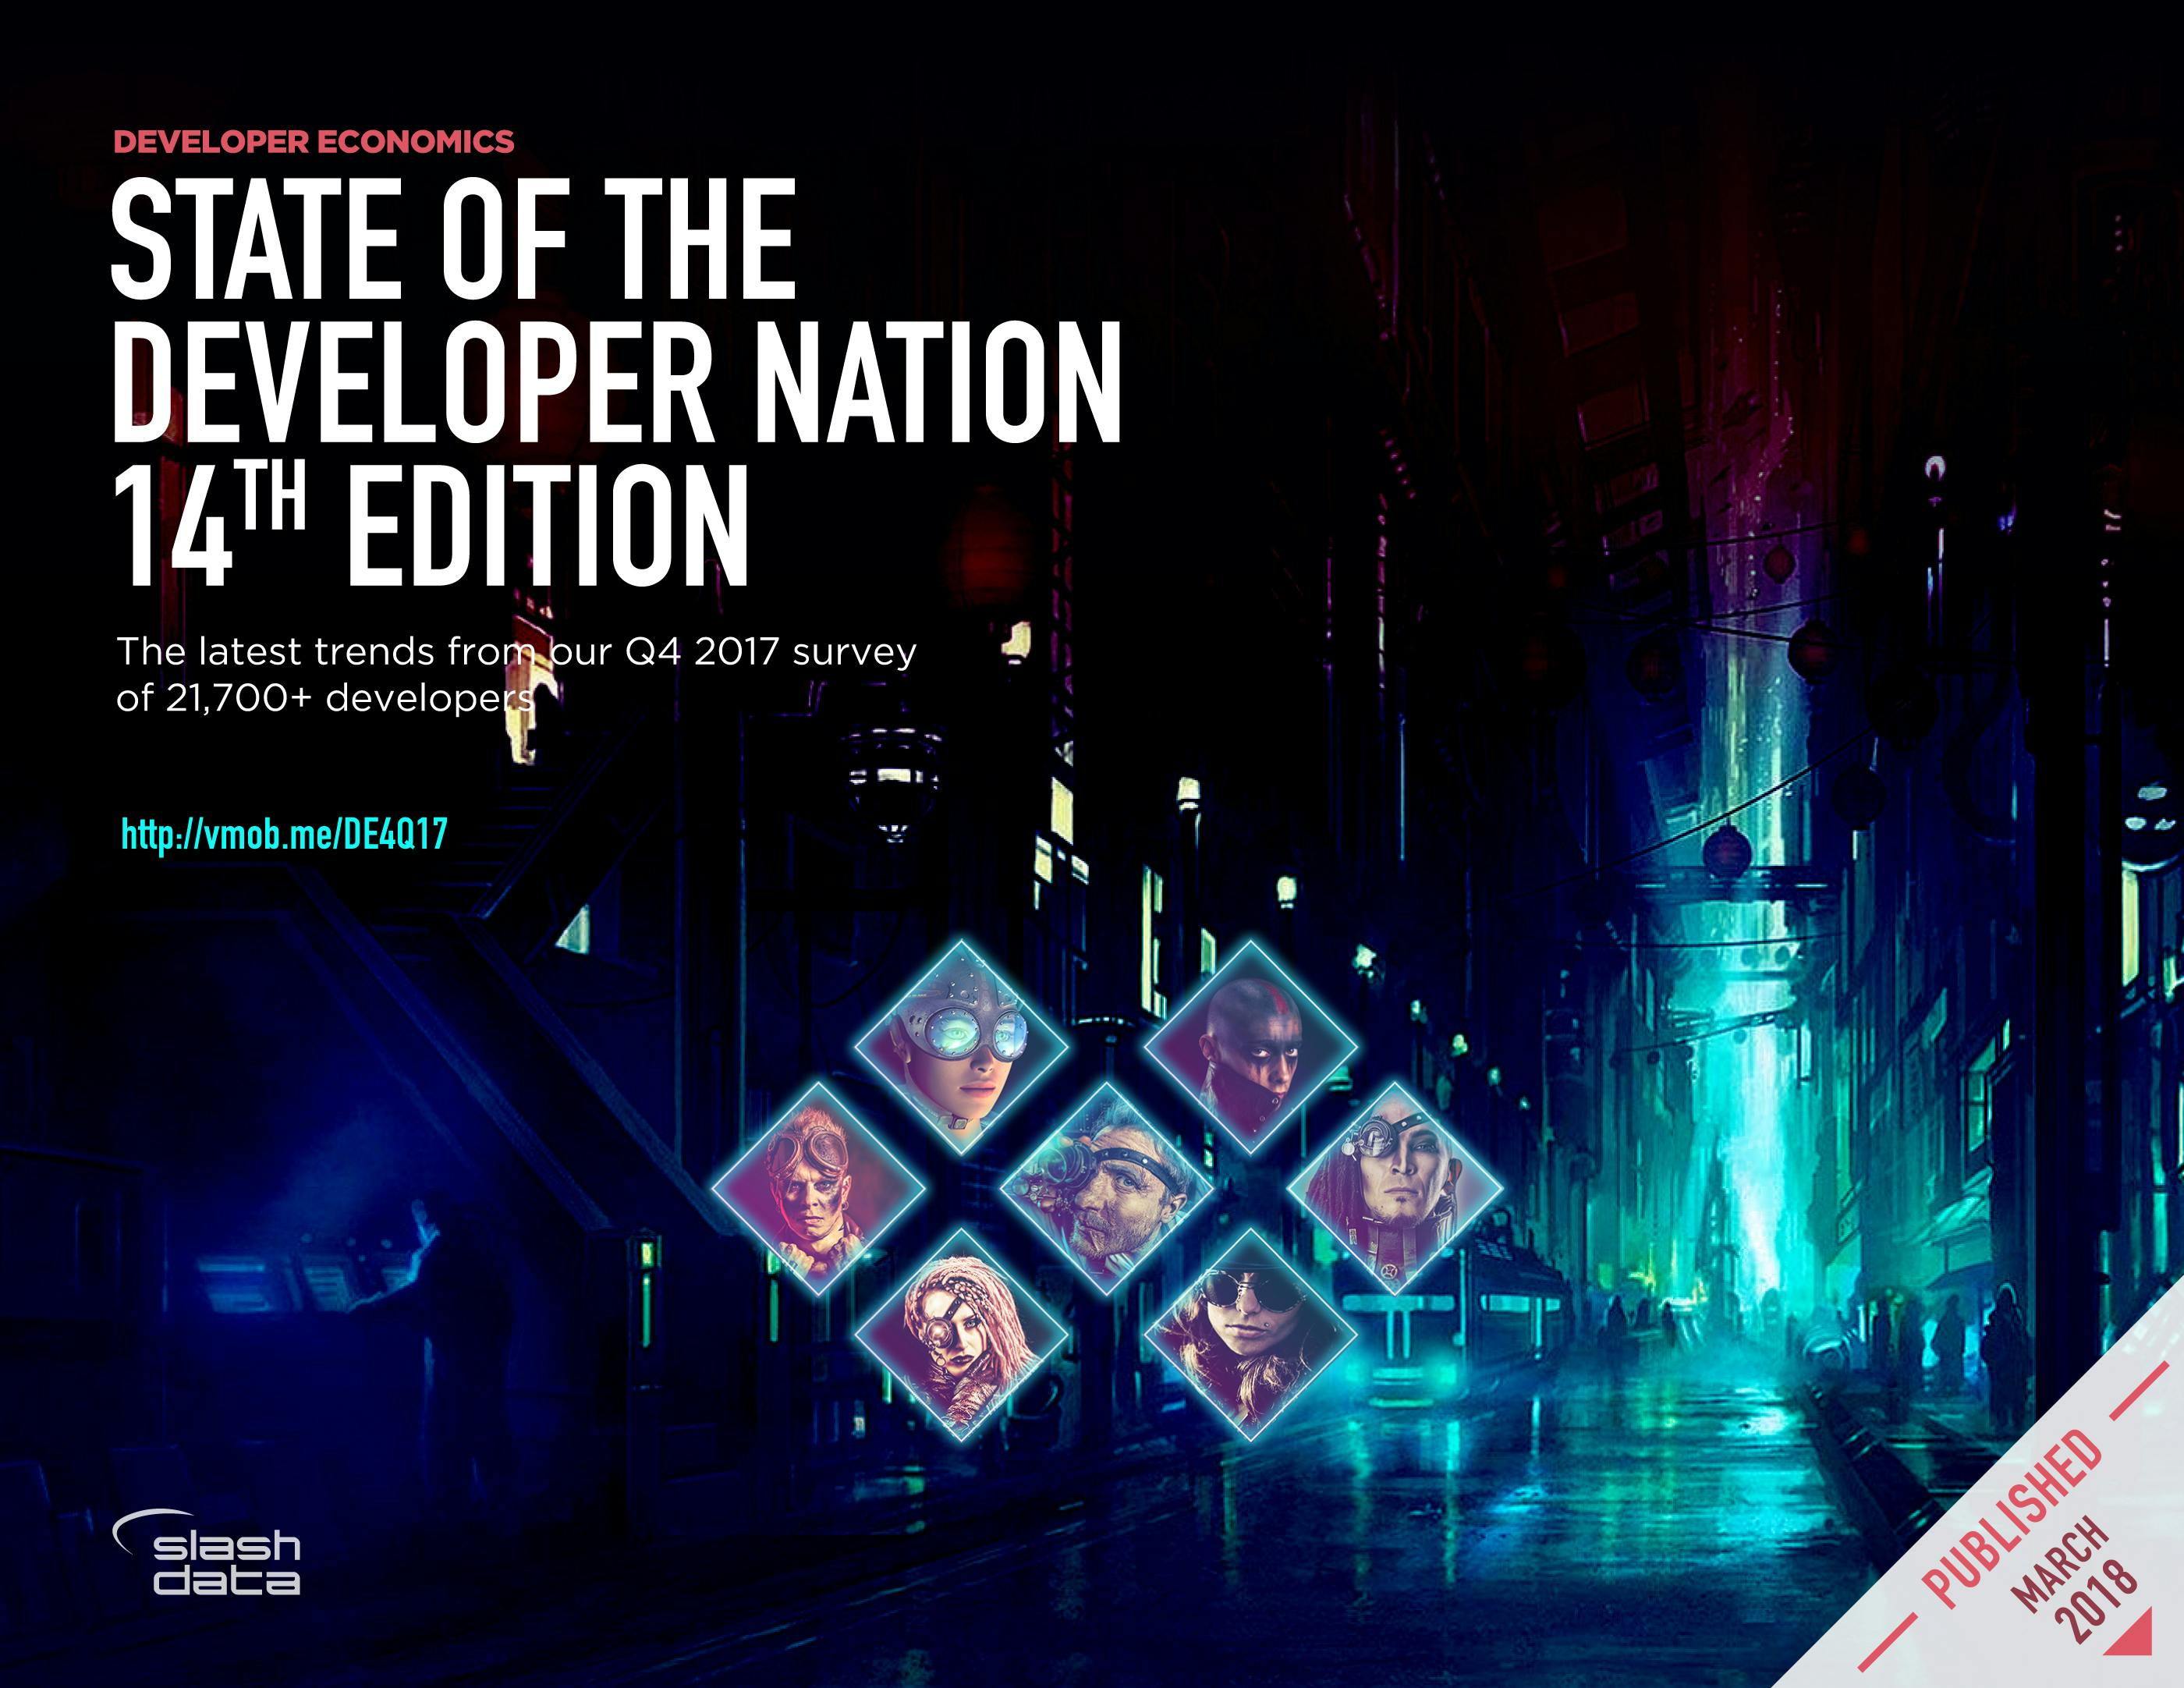 State of the Developer Nation 14th Edition - Q4 2017